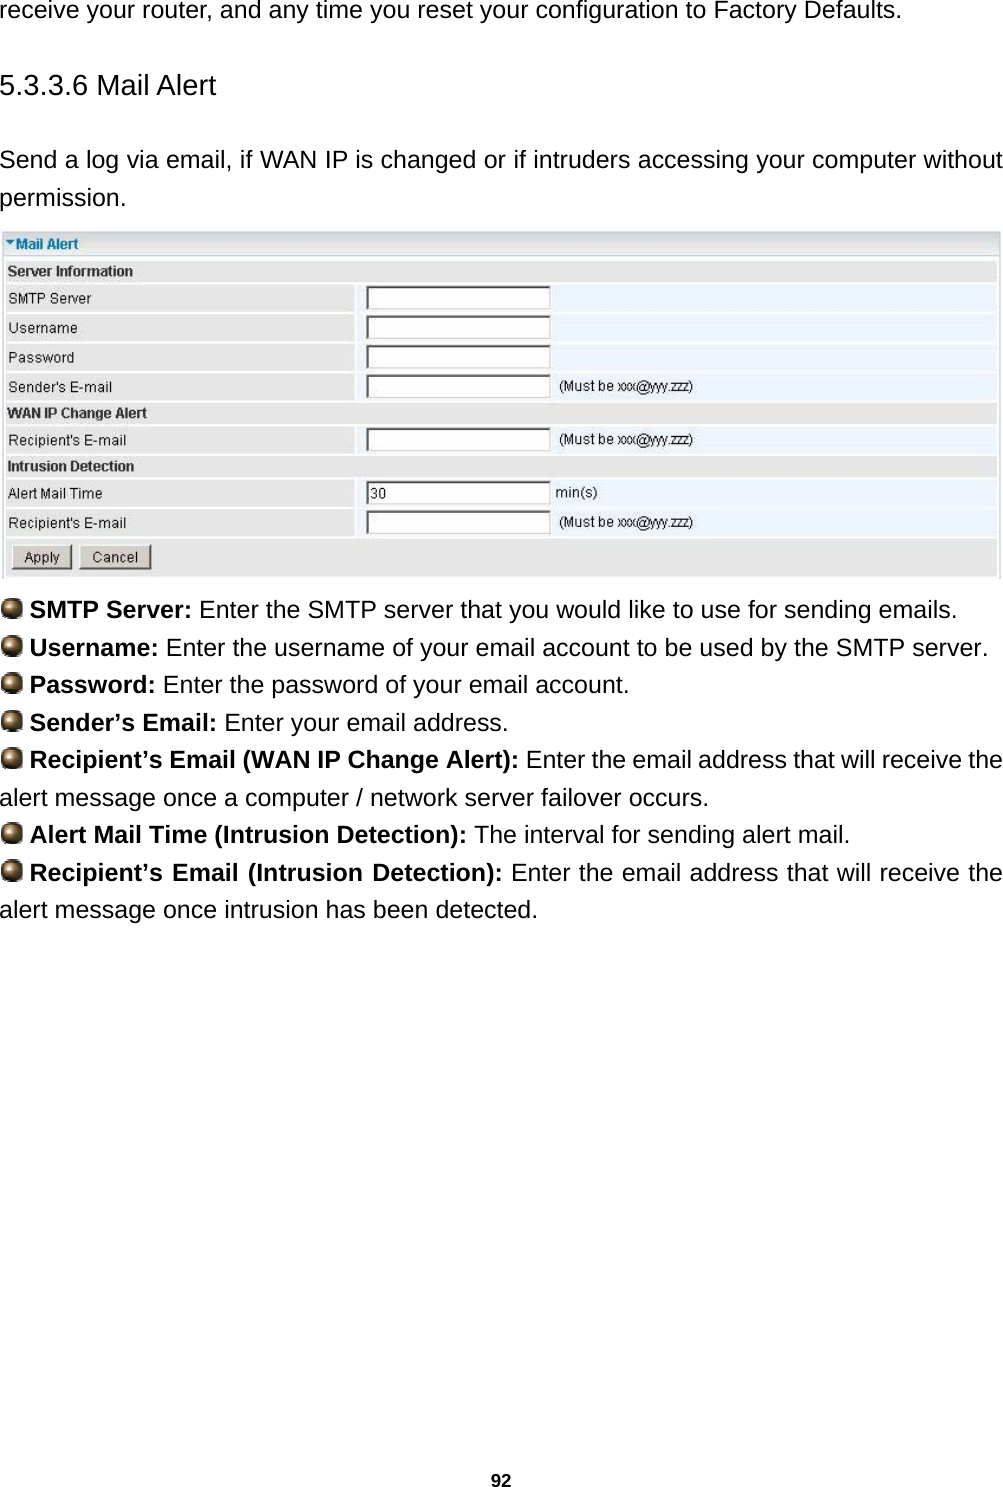 92 receive your router, and any time you reset your configuration to Factory Defaults.  5.3.3.6 Mail Alert  Send a log via email, if WAN IP is changed or if intruders accessing your computer without permission.    SMTP Server: Enter the SMTP server that you would like to use for sending emails.  Username: Enter the username of your email account to be used by the SMTP server.  Password: Enter the password of your email account.  Sender’s Email: Enter your email address.  Recipient’s Email (WAN IP Change Alert): Enter the email address that will receive the alert message once a computer / network server failover occurs.  Alert Mail Time (Intrusion Detection): The interval for sending alert mail.  Recipient’s Email (Intrusion Detection): Enter the email address that will receive the alert message once intrusion has been detected. 